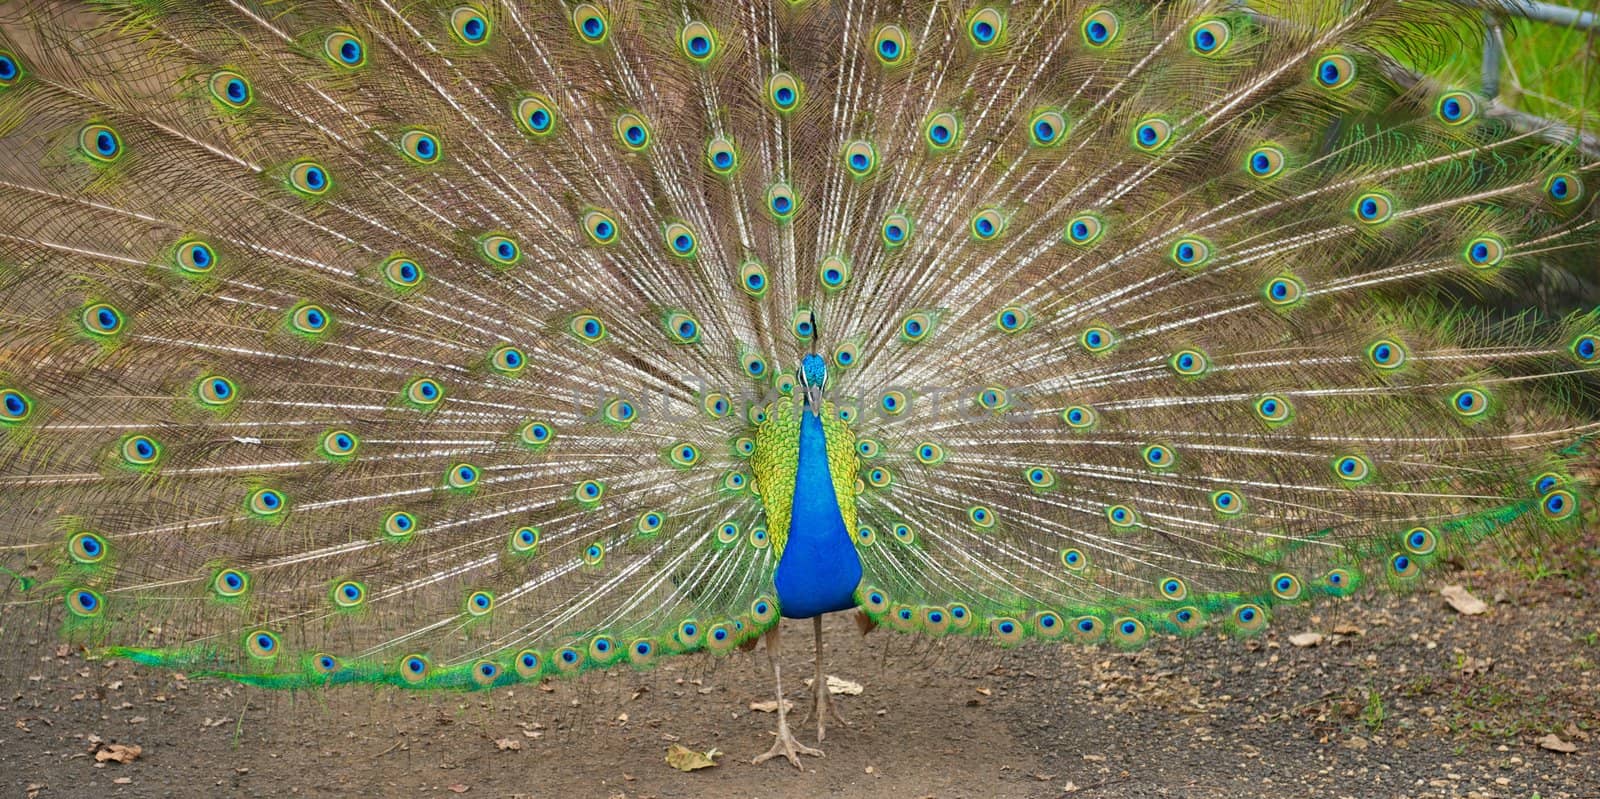 Vibrant Blue Peacock Spreading its Feathers by pixelsnap